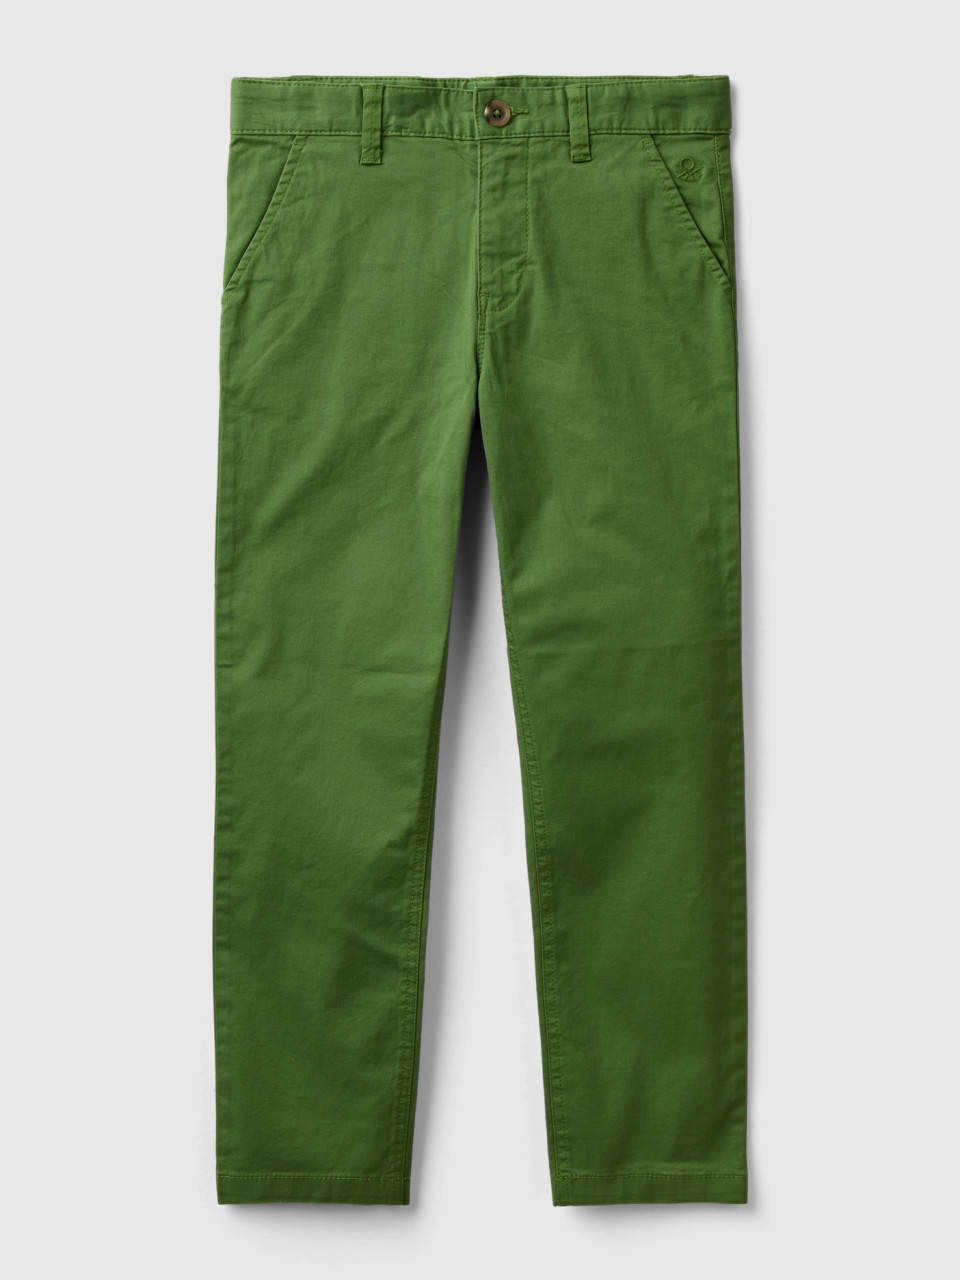 Benetton, Slim Fit Chinos In Stretch Cotton, Military Green, Kids